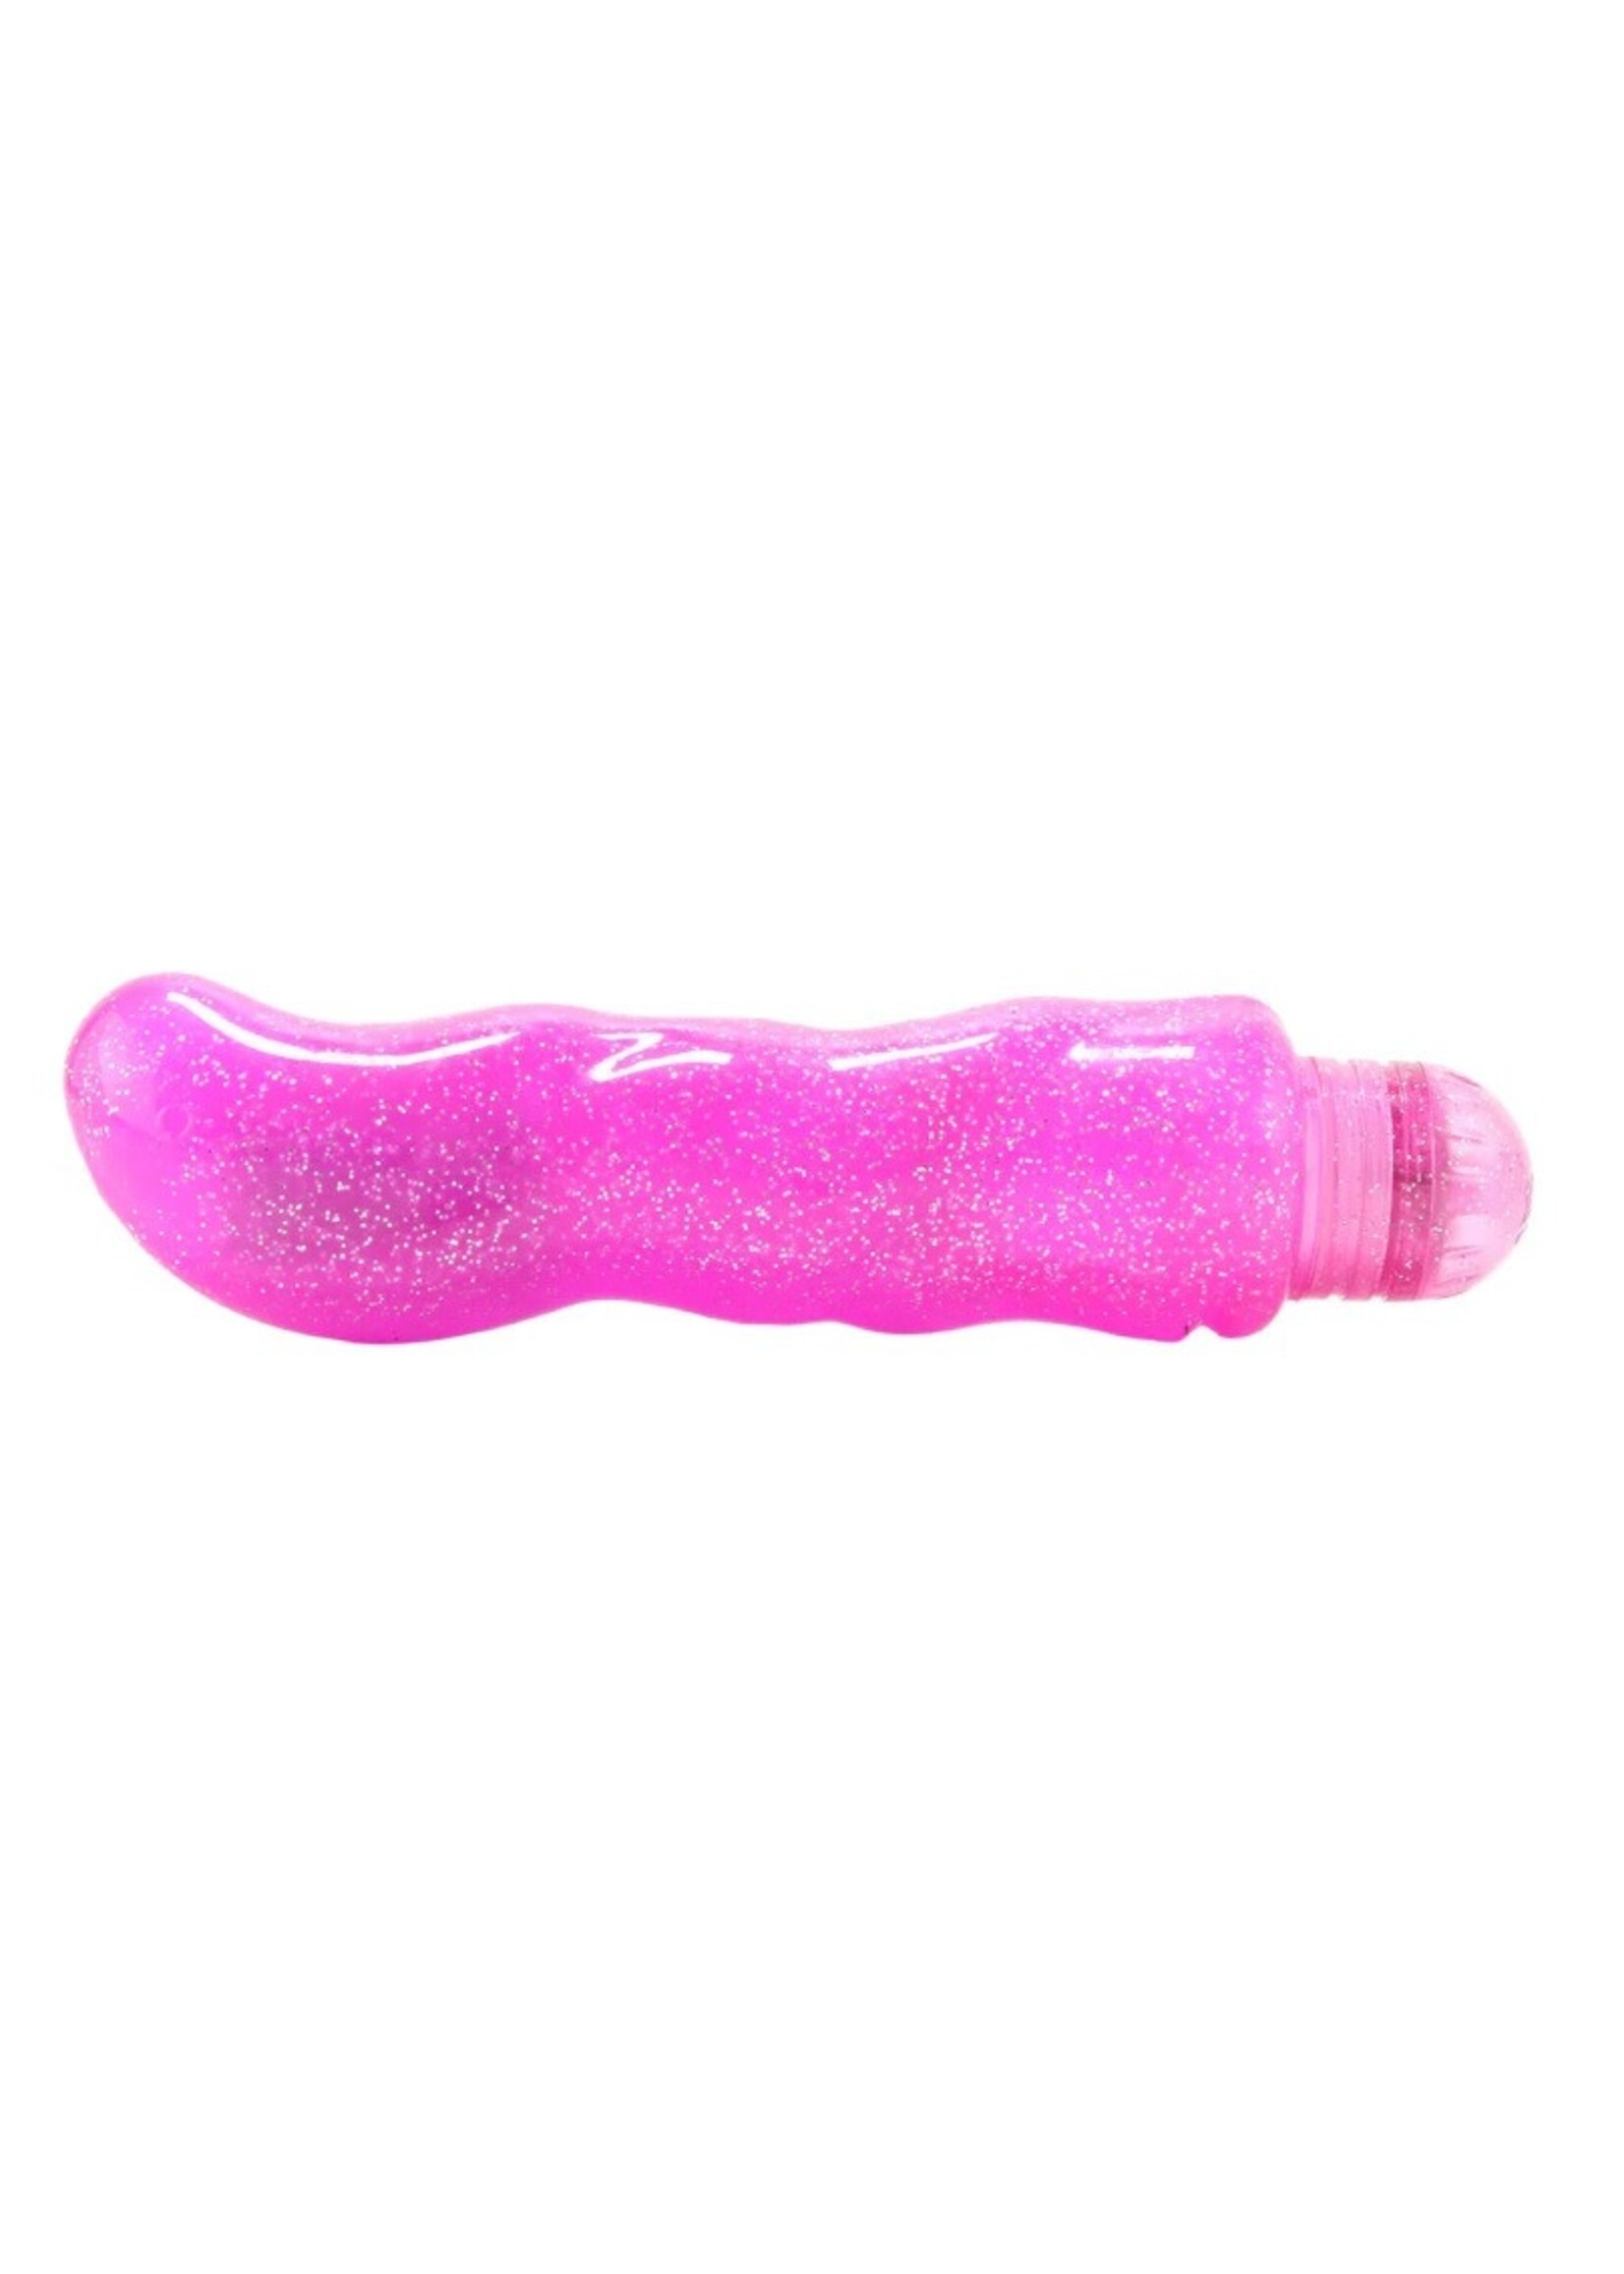 Sparkle "G" Dazzle Multi-Speed Vibe in Pink